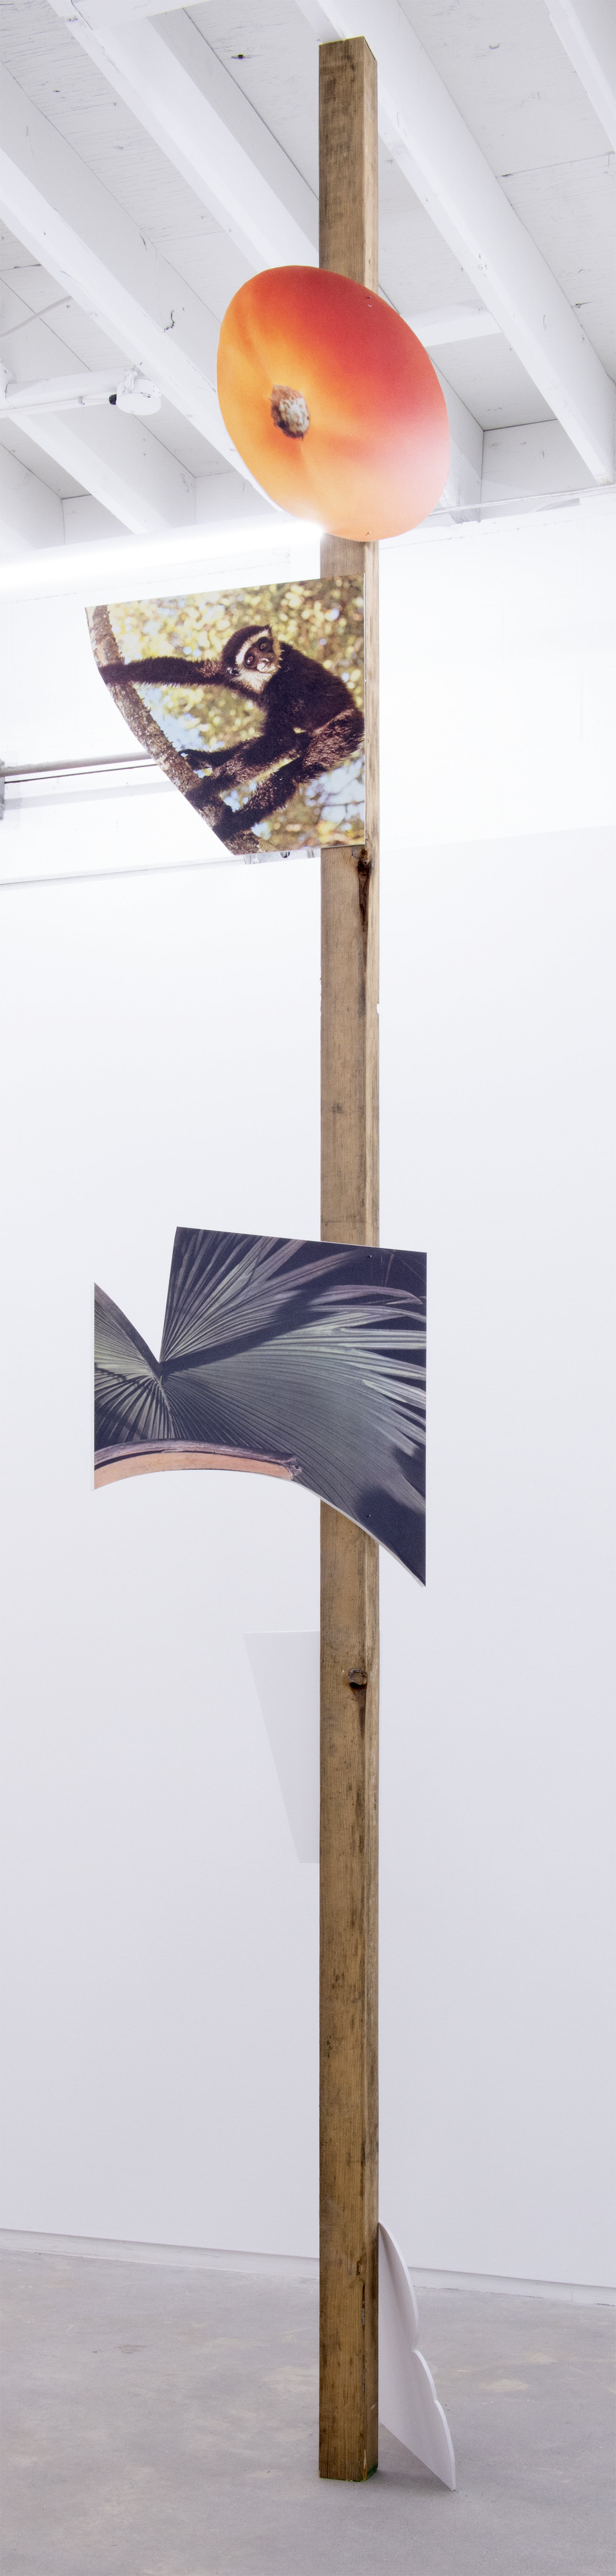 Geoffrey Farmer, This one is the lightness of a palm frond, the sound of a lute, the colour of fruit. The expressions of a monkey. A large orange eye. I drift in the warm wind., 2014, douglas fir pole, 6 photographs mounted on foamcore, 200 x 4 x 4 in. (508 x 9 x 9 cm)